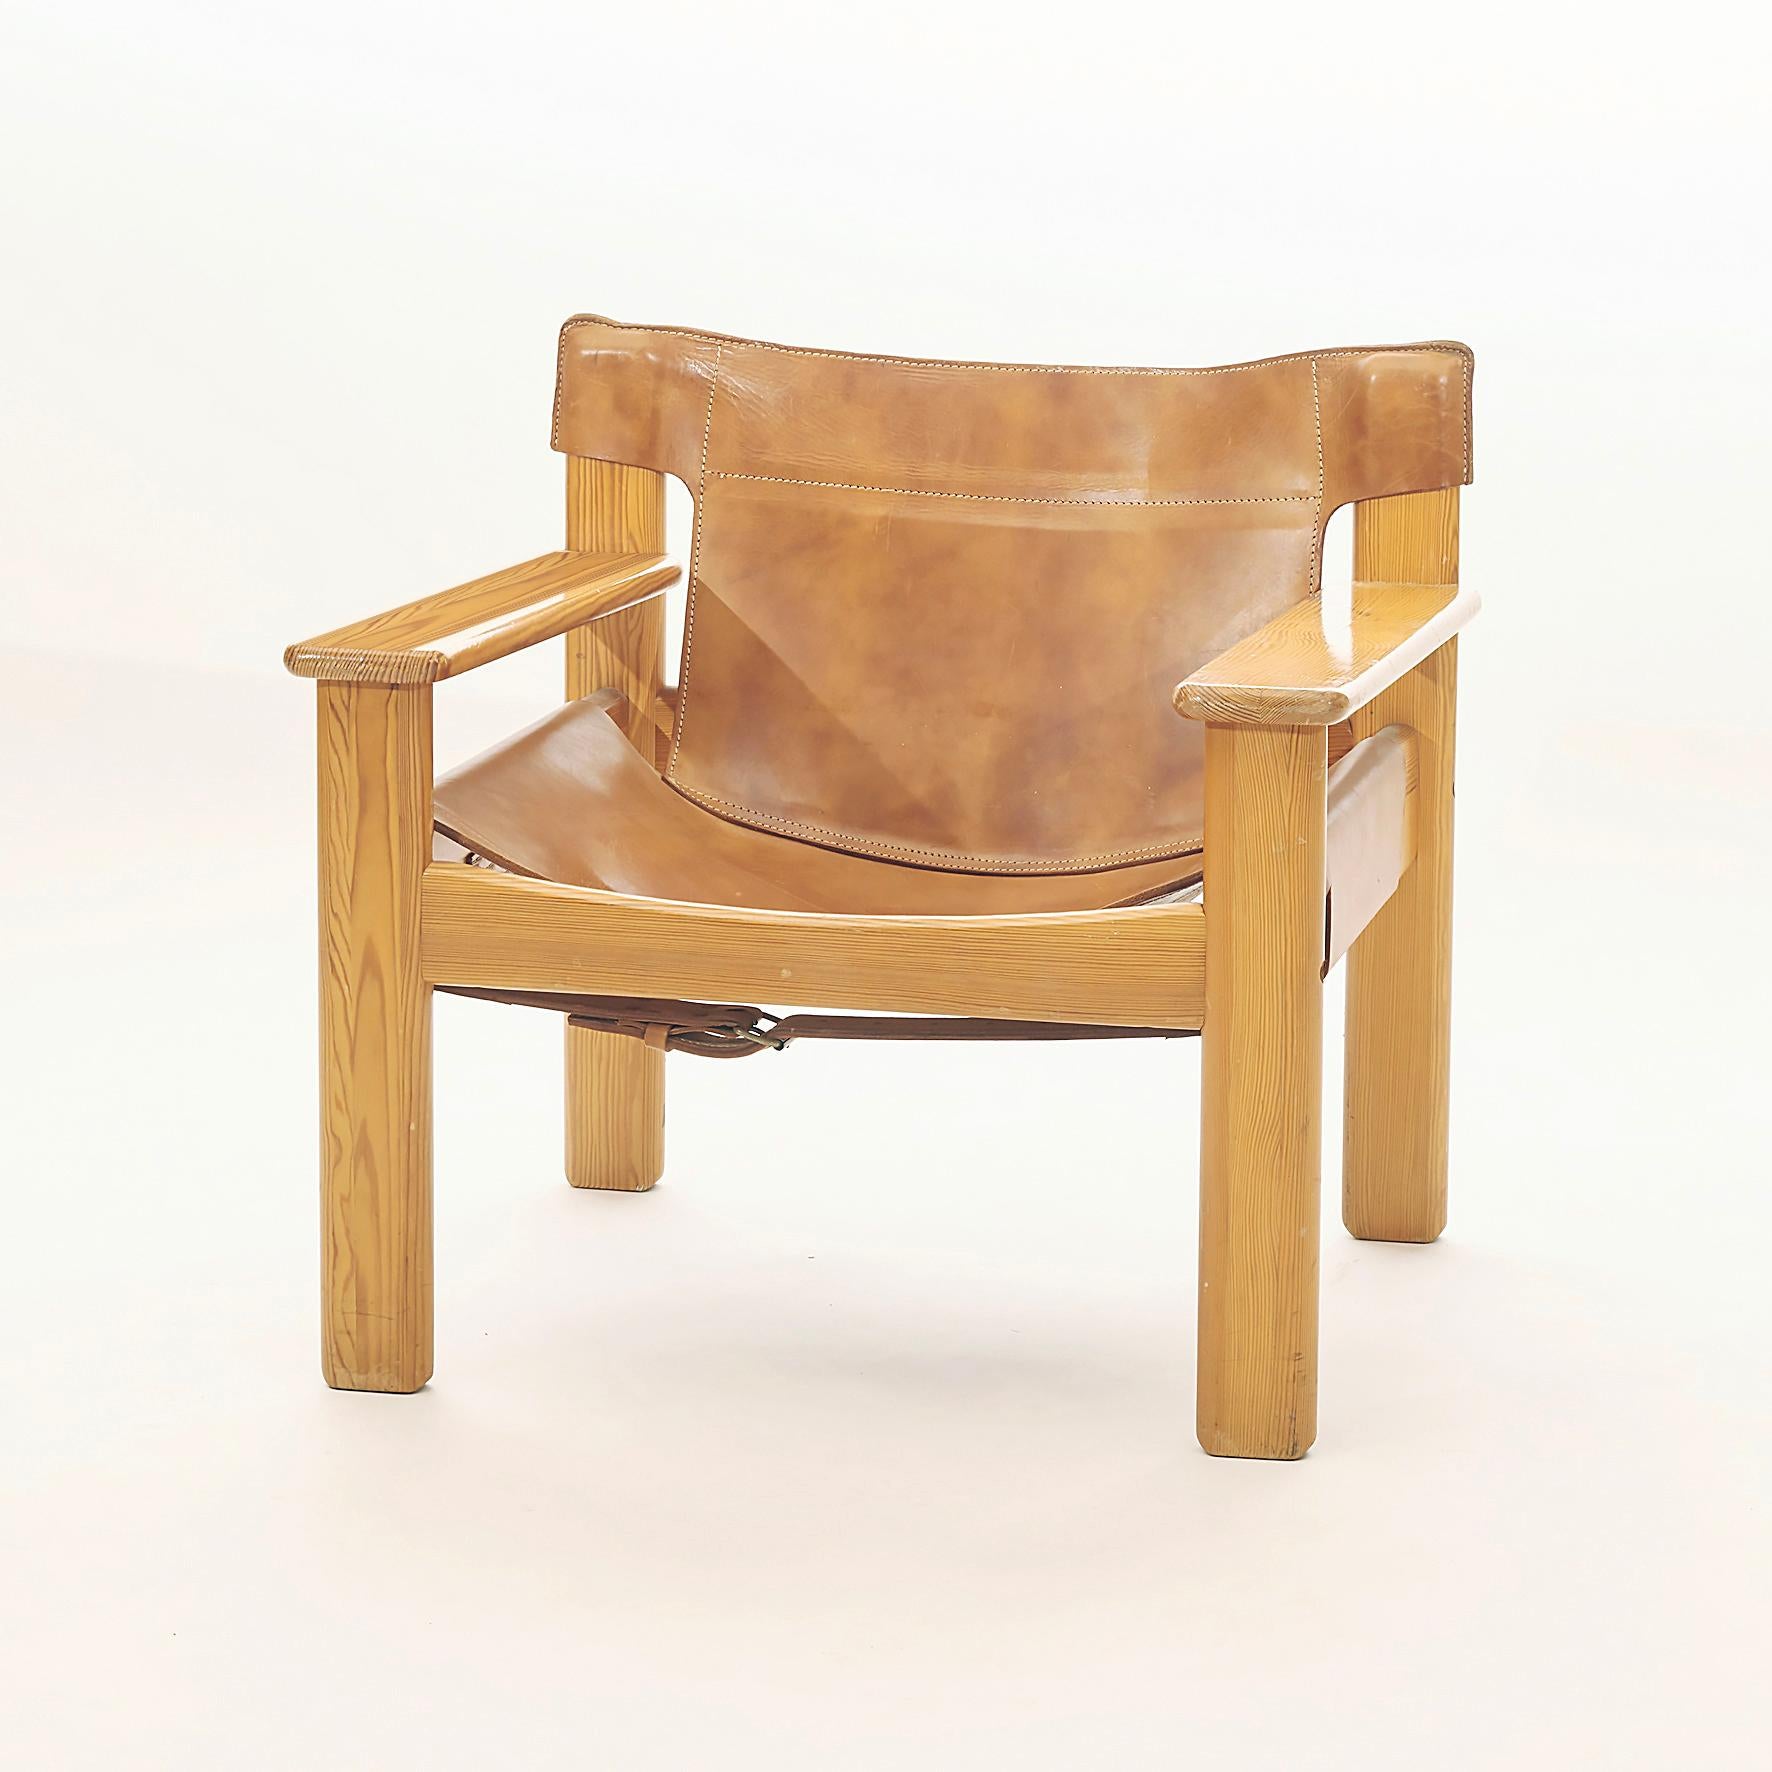 Karin Mobring natura easy chairs made for Ikea, Sweden, 1970s. Leather and pine. Excellent vintage condition.